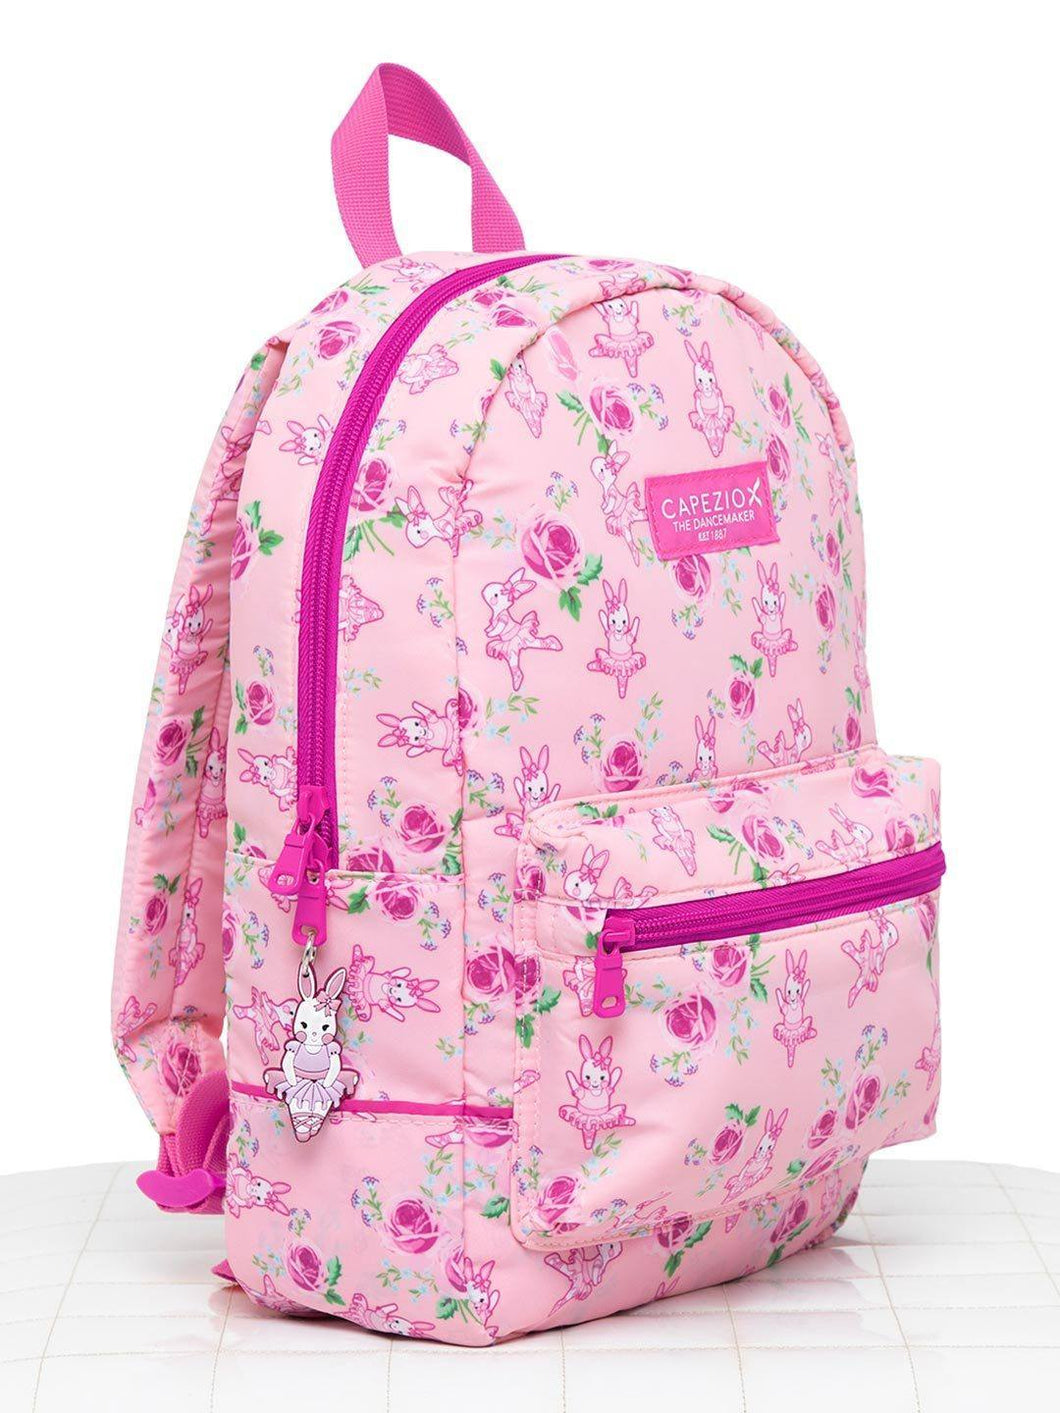 Capezio Some Bunny Loves You Backpack